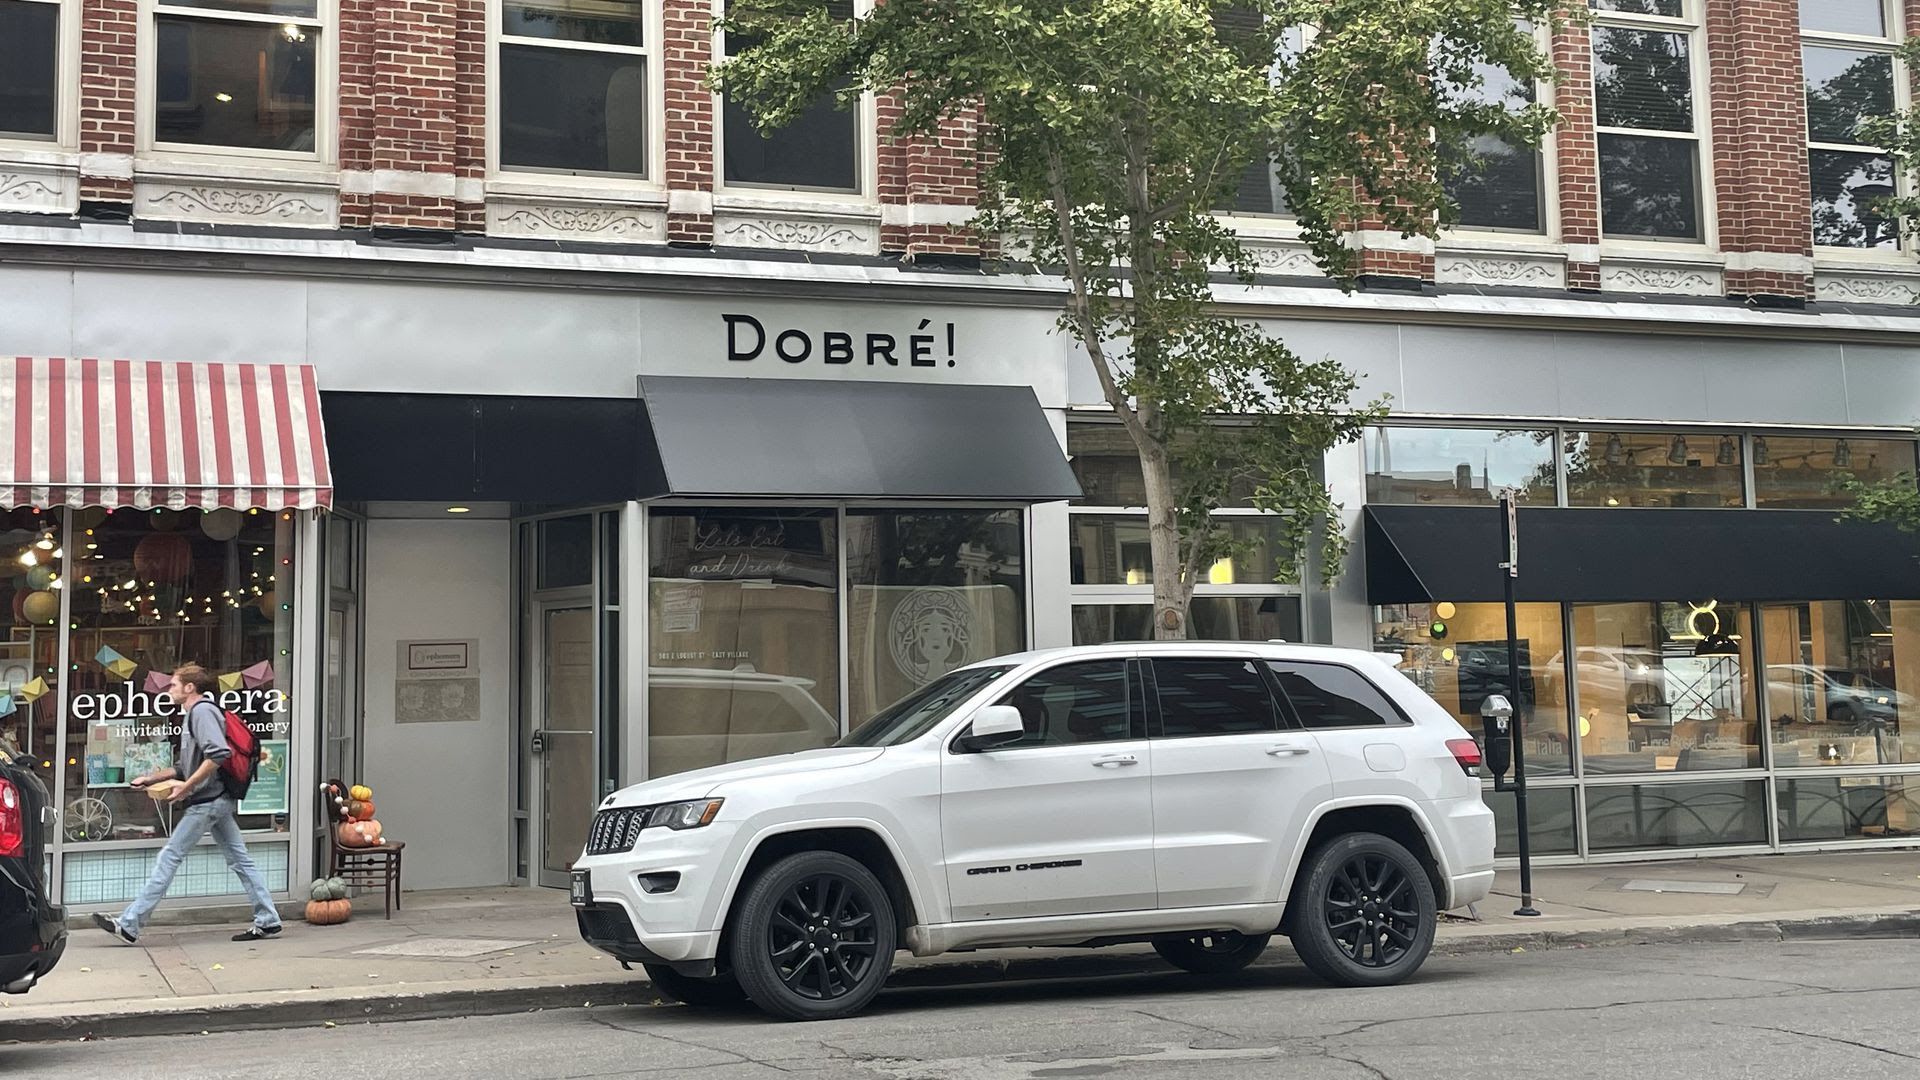 The former location of Dobre at 503 E Locust St. in Des Moines.